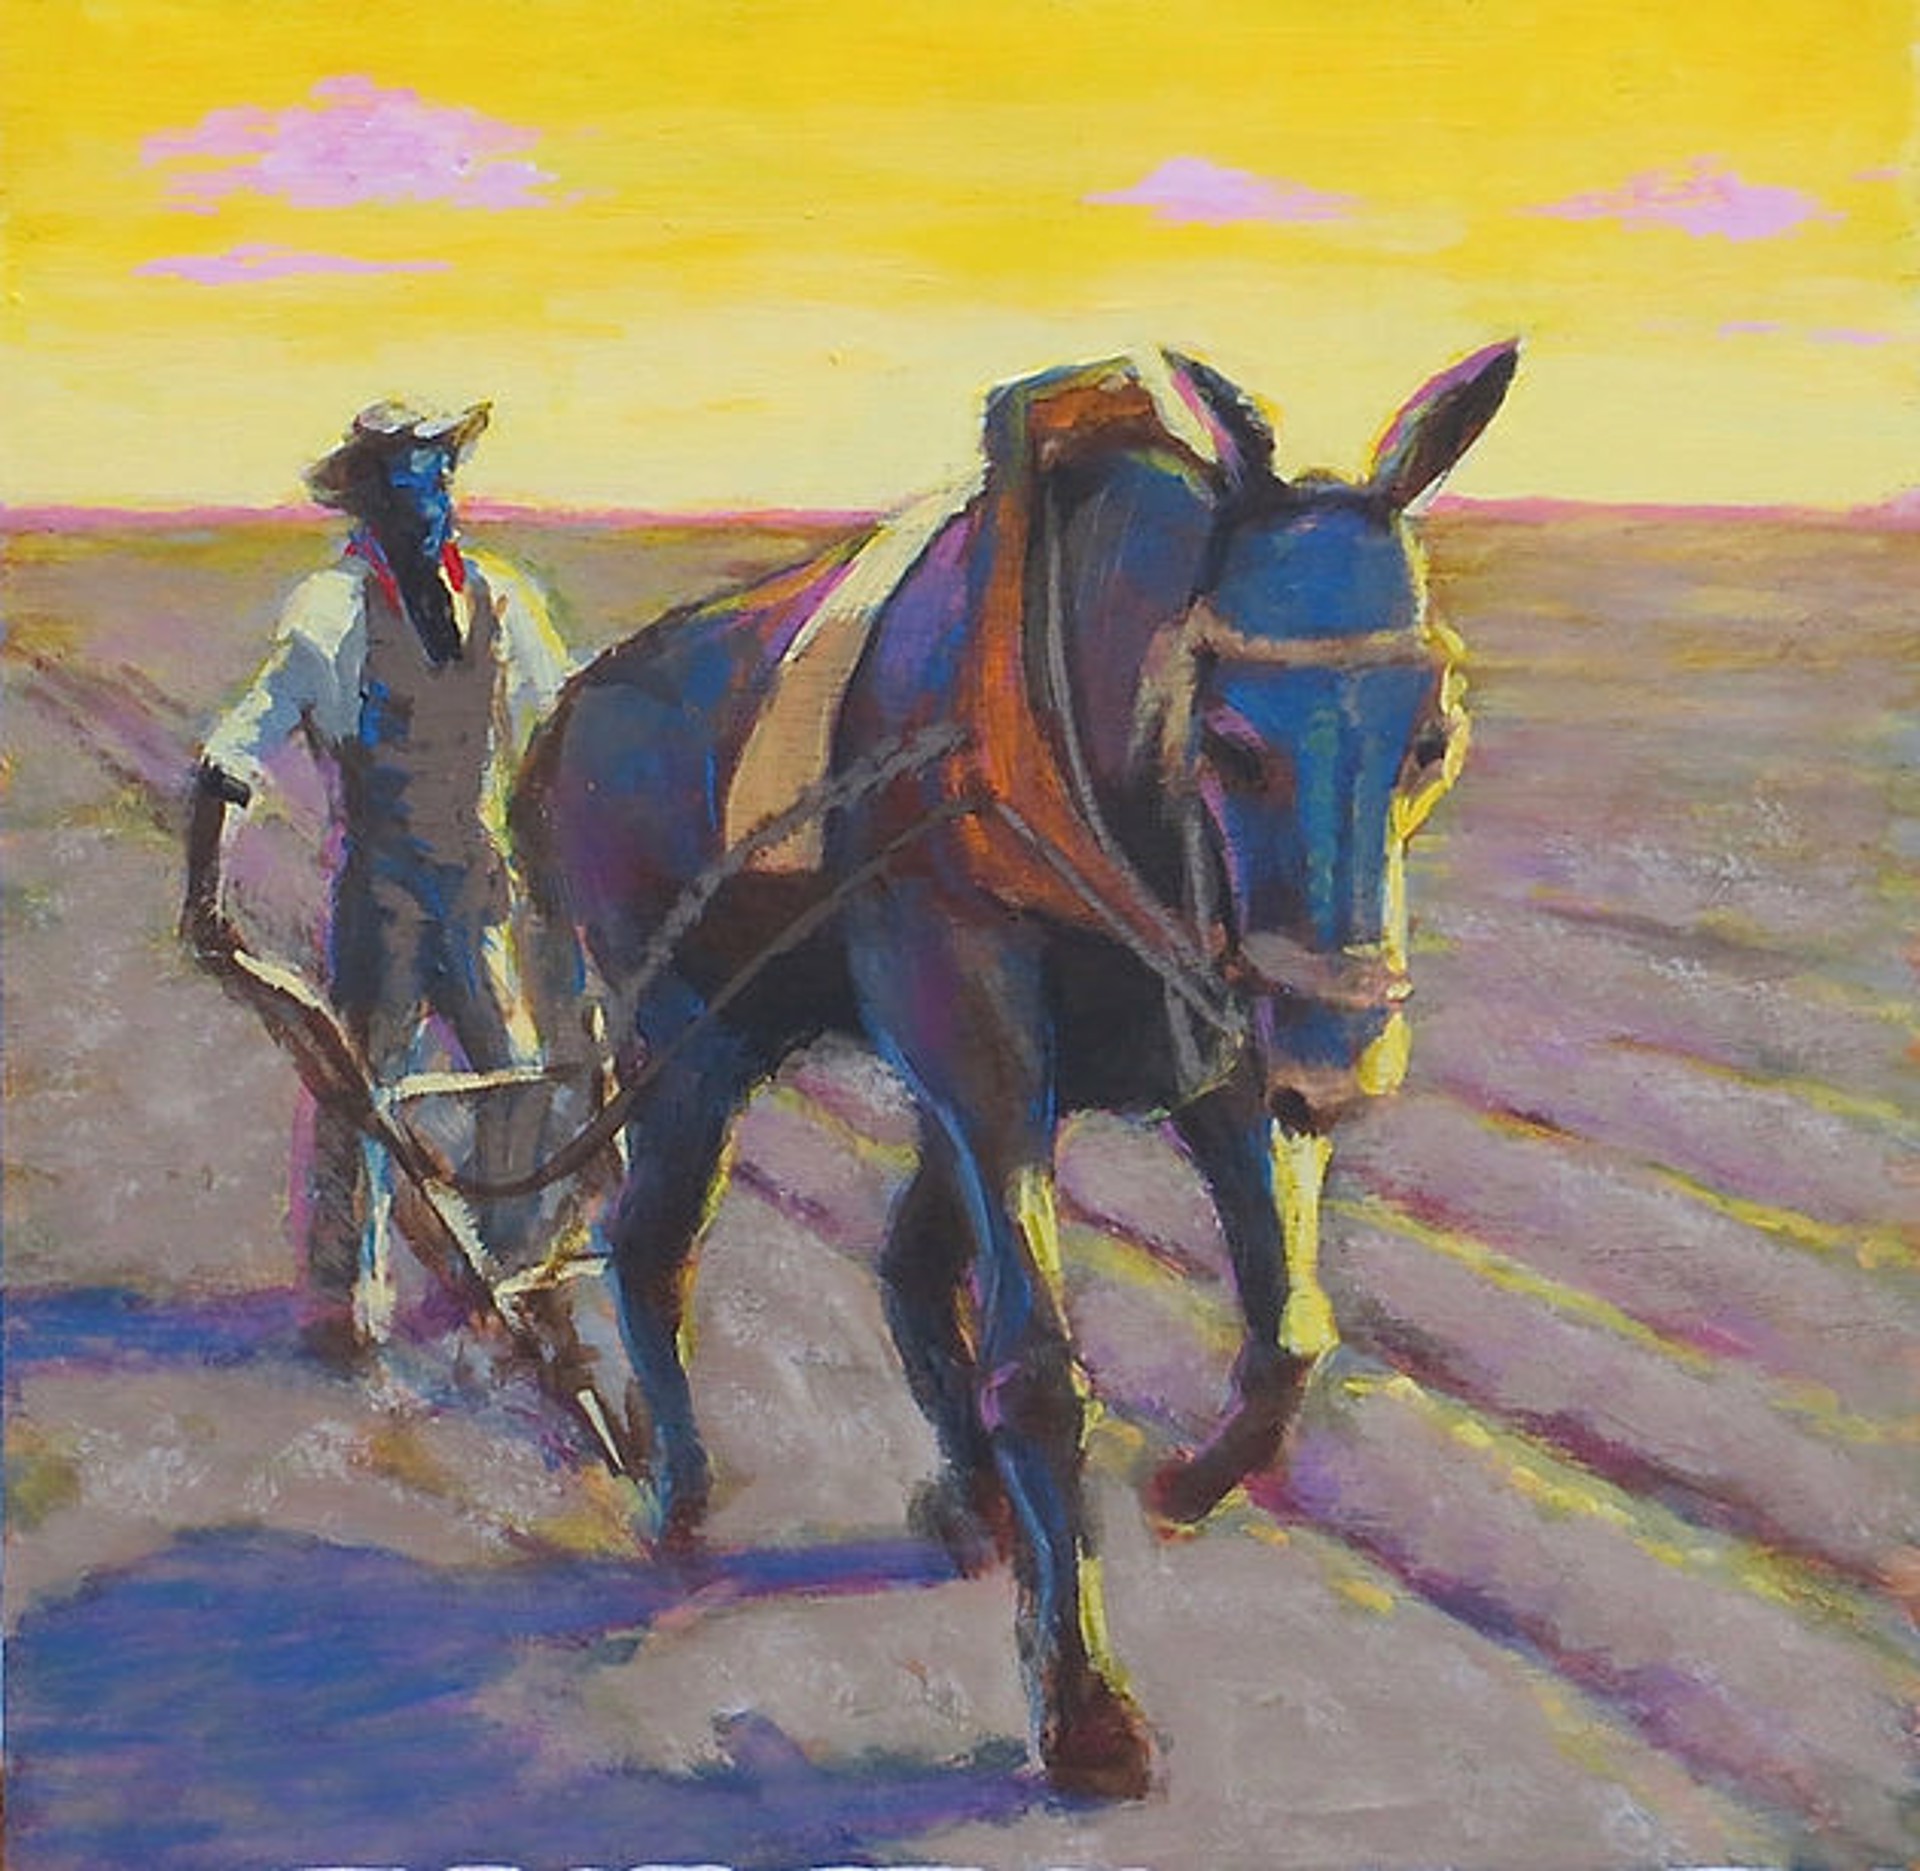 "40 Acres and A Mule" by Robert Ketchens